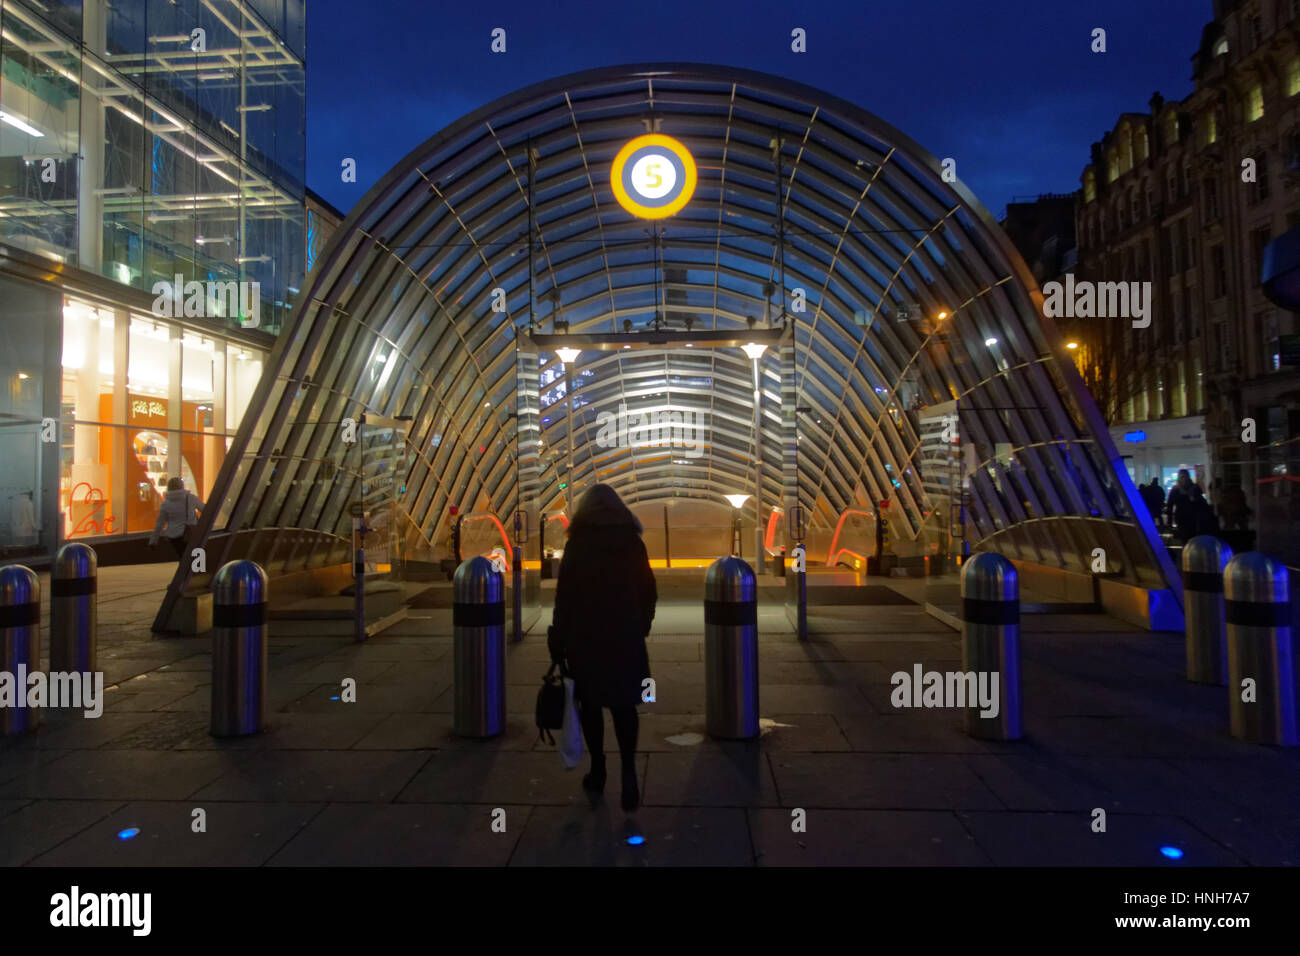 Glasgow underground or Subway entrance to st enoch station night Stock Photo